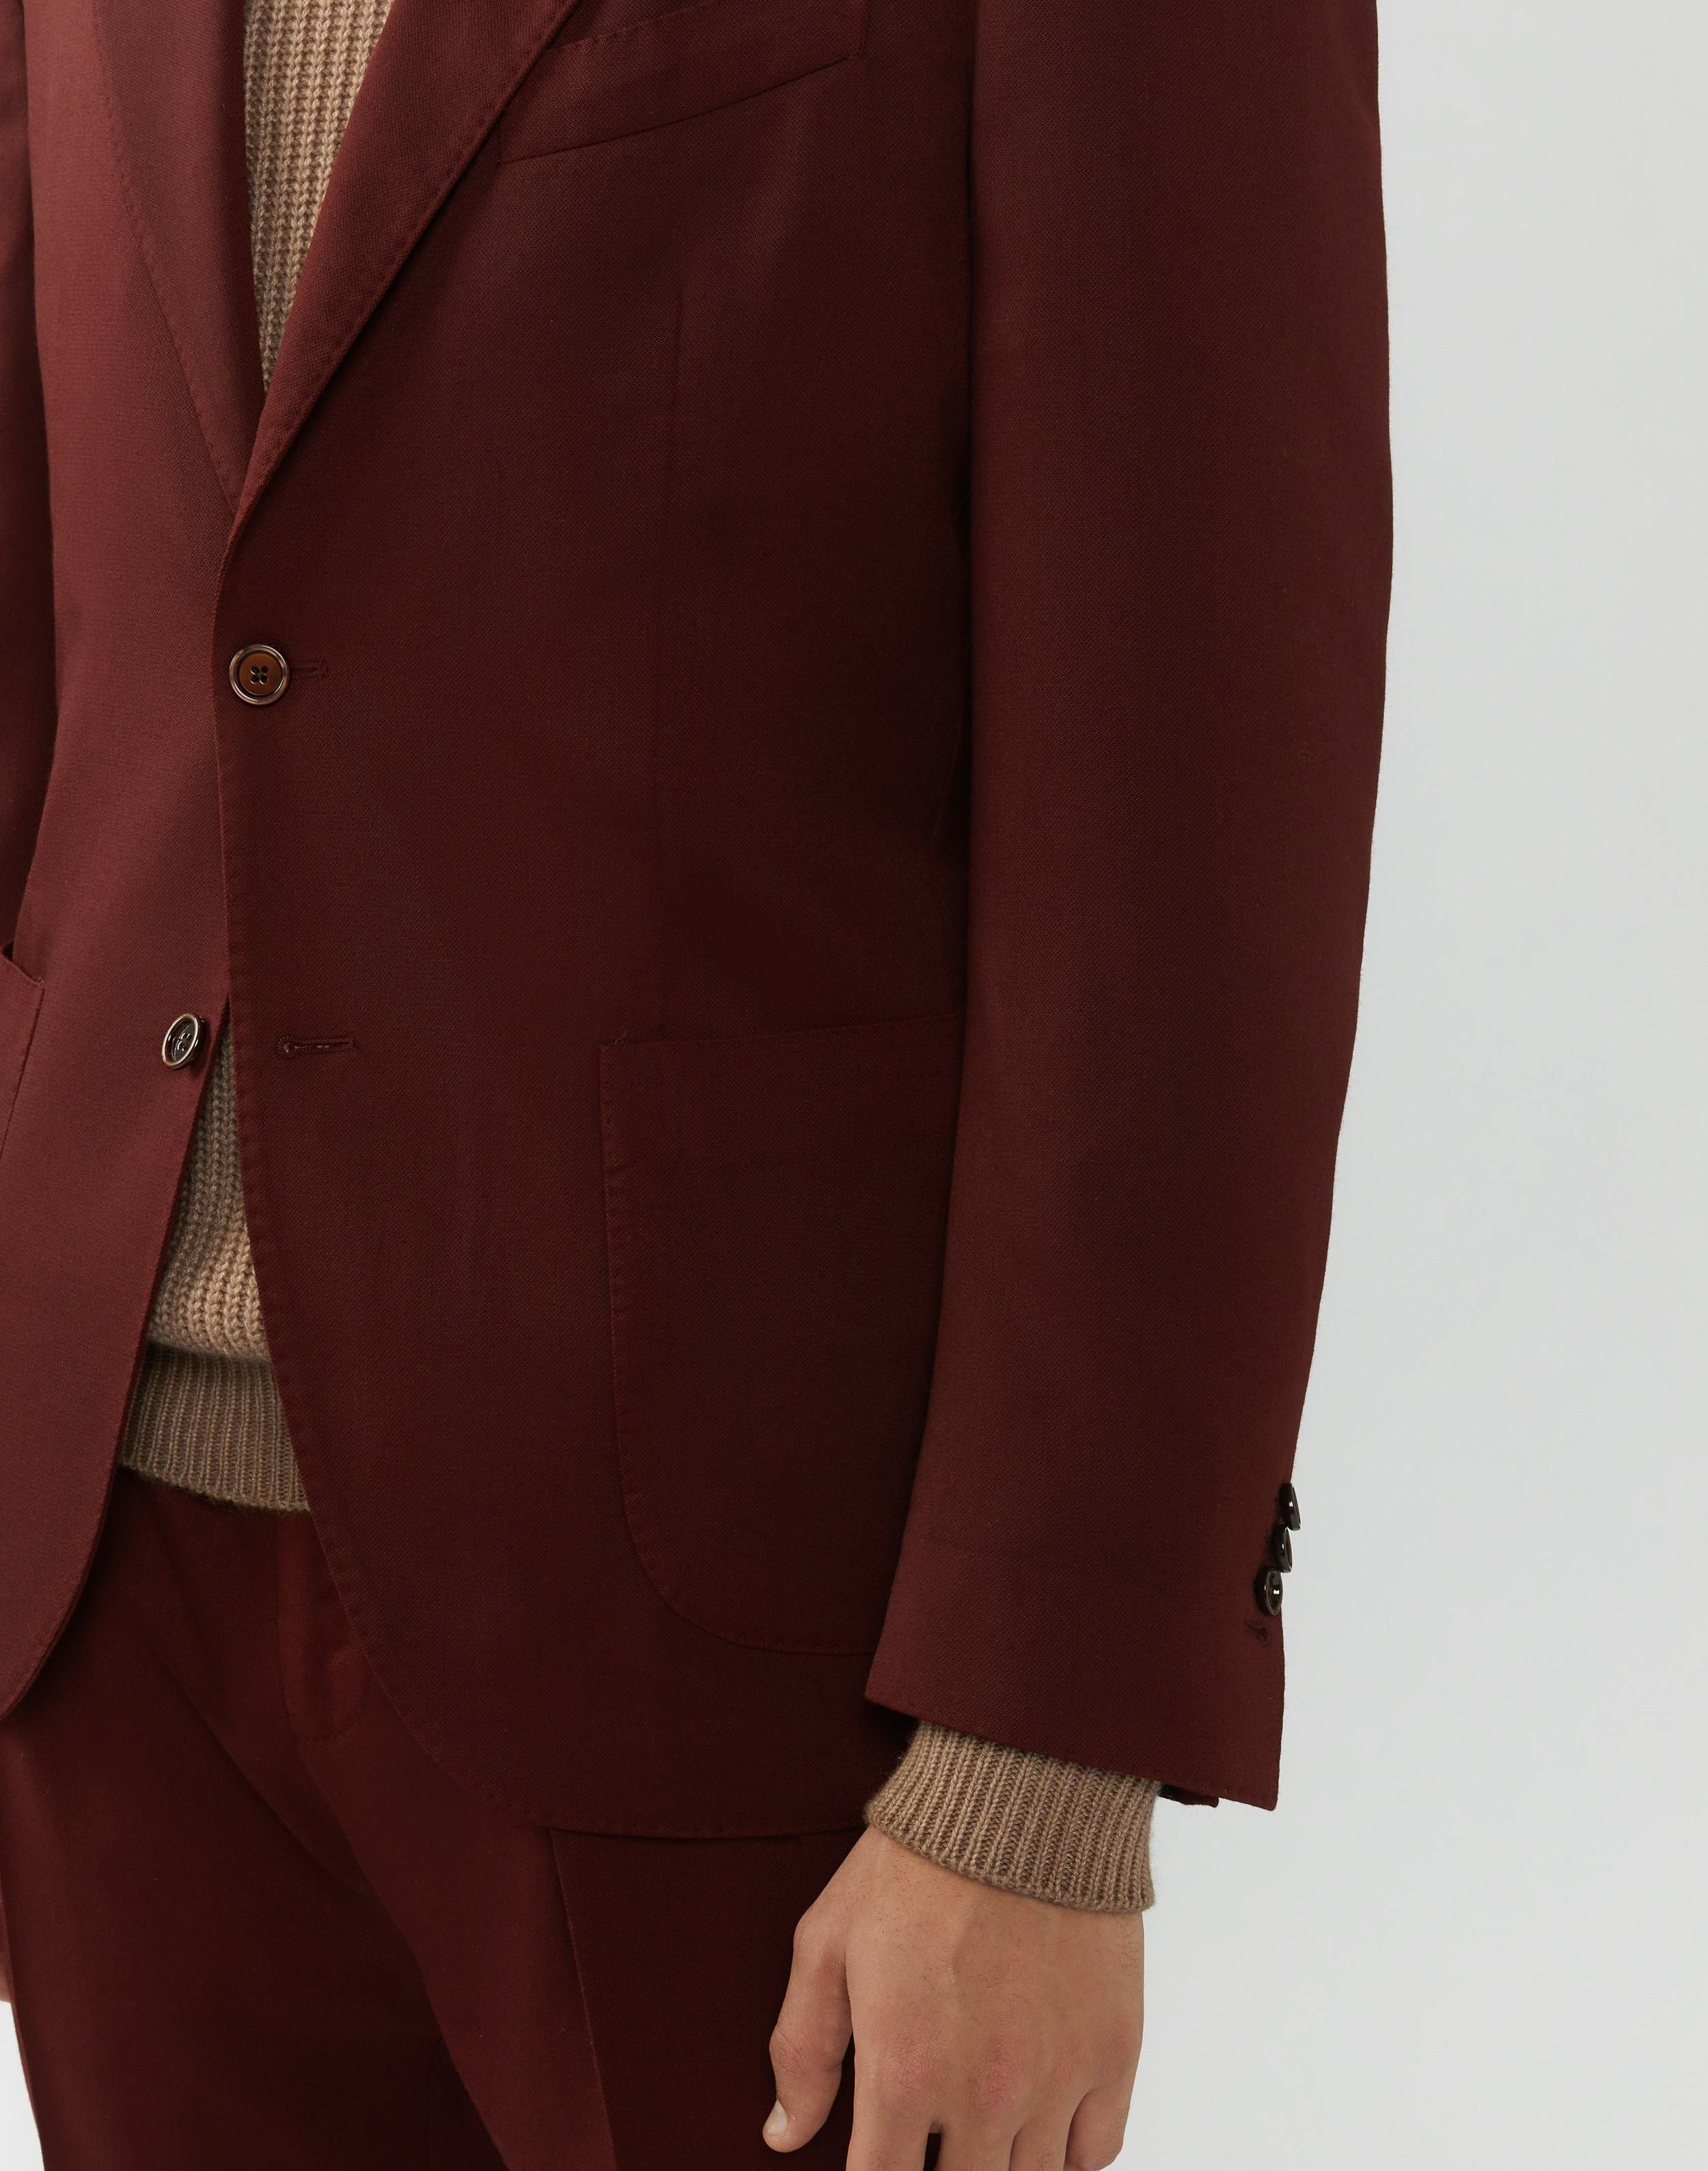 Suit in a crease-proof burgundy fabric - Supersoft 